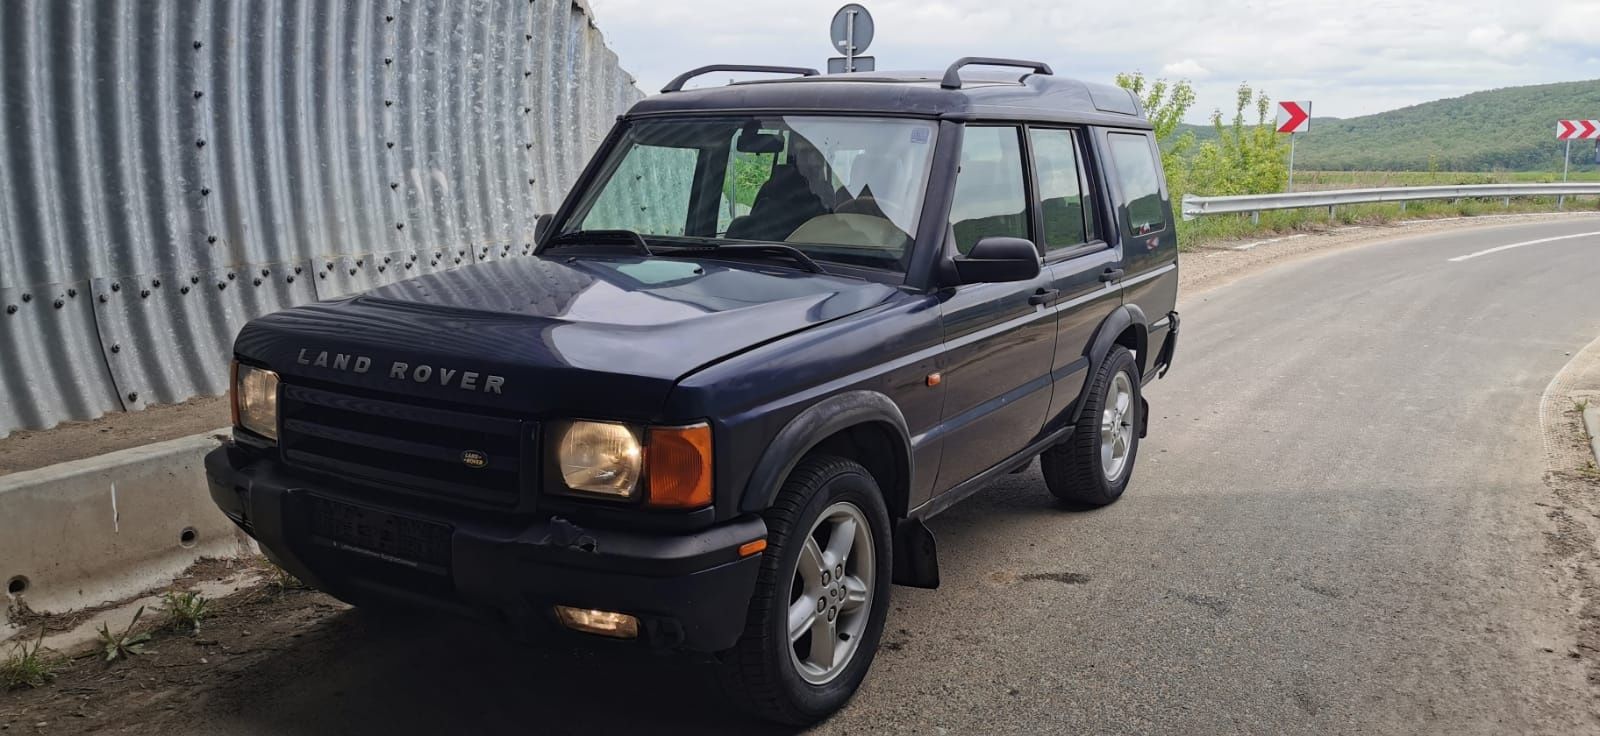 Land rover Discovery 2.5 tdi an Urgent2000 4x4